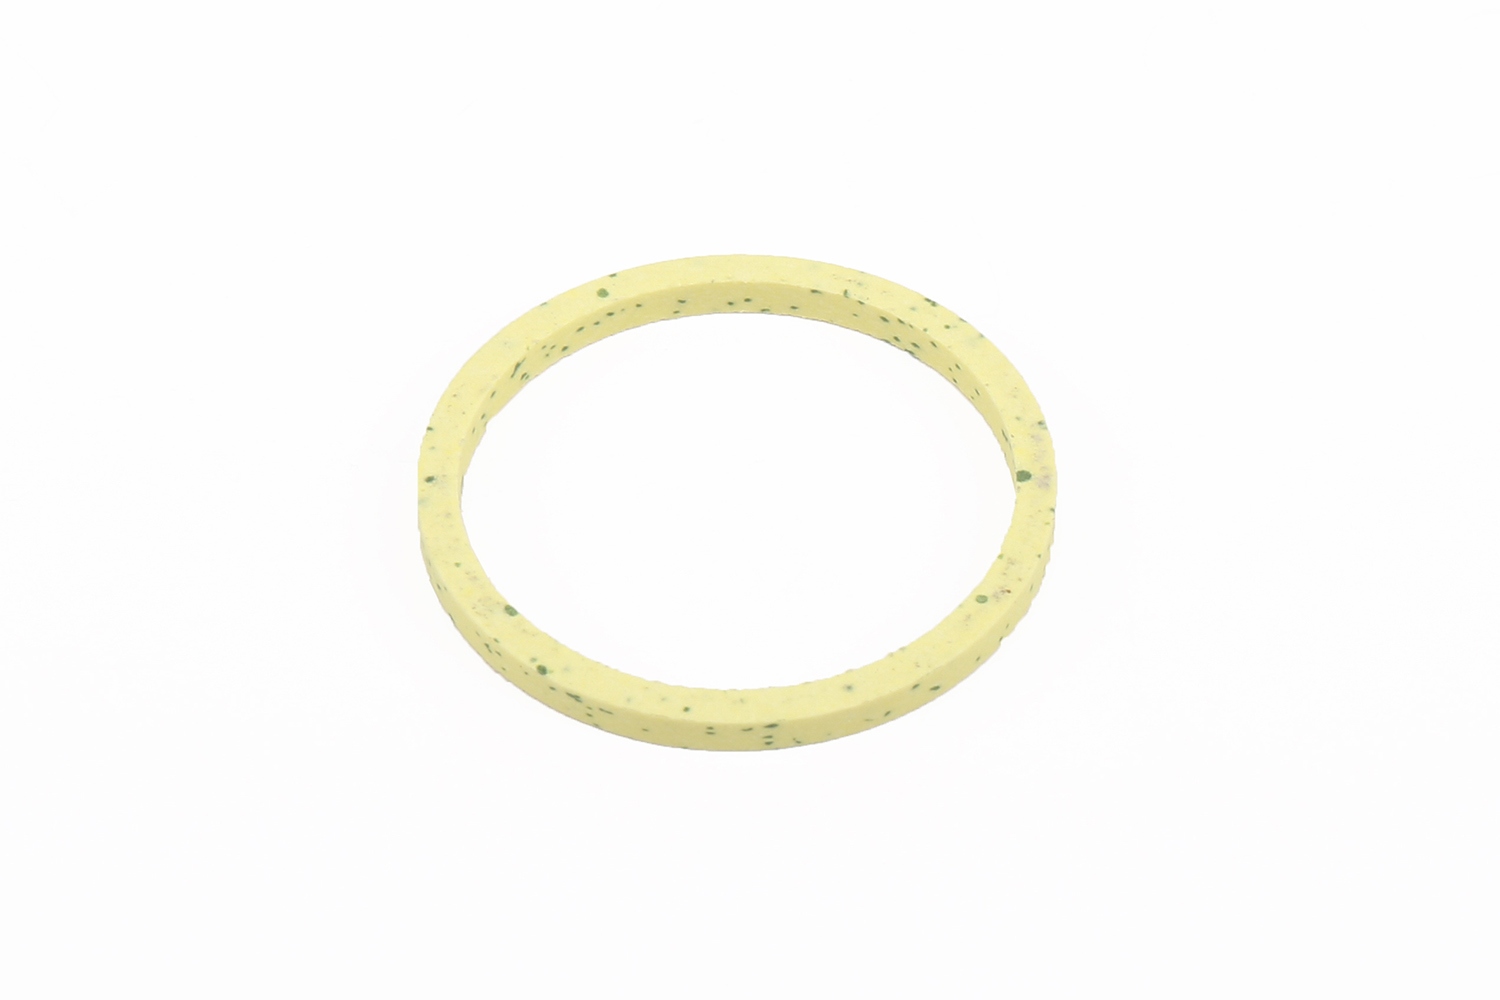 GM GENUINE PARTS - Automatic Transmission Turbine Shaft Fluid Seal Ring - GMP 24224655